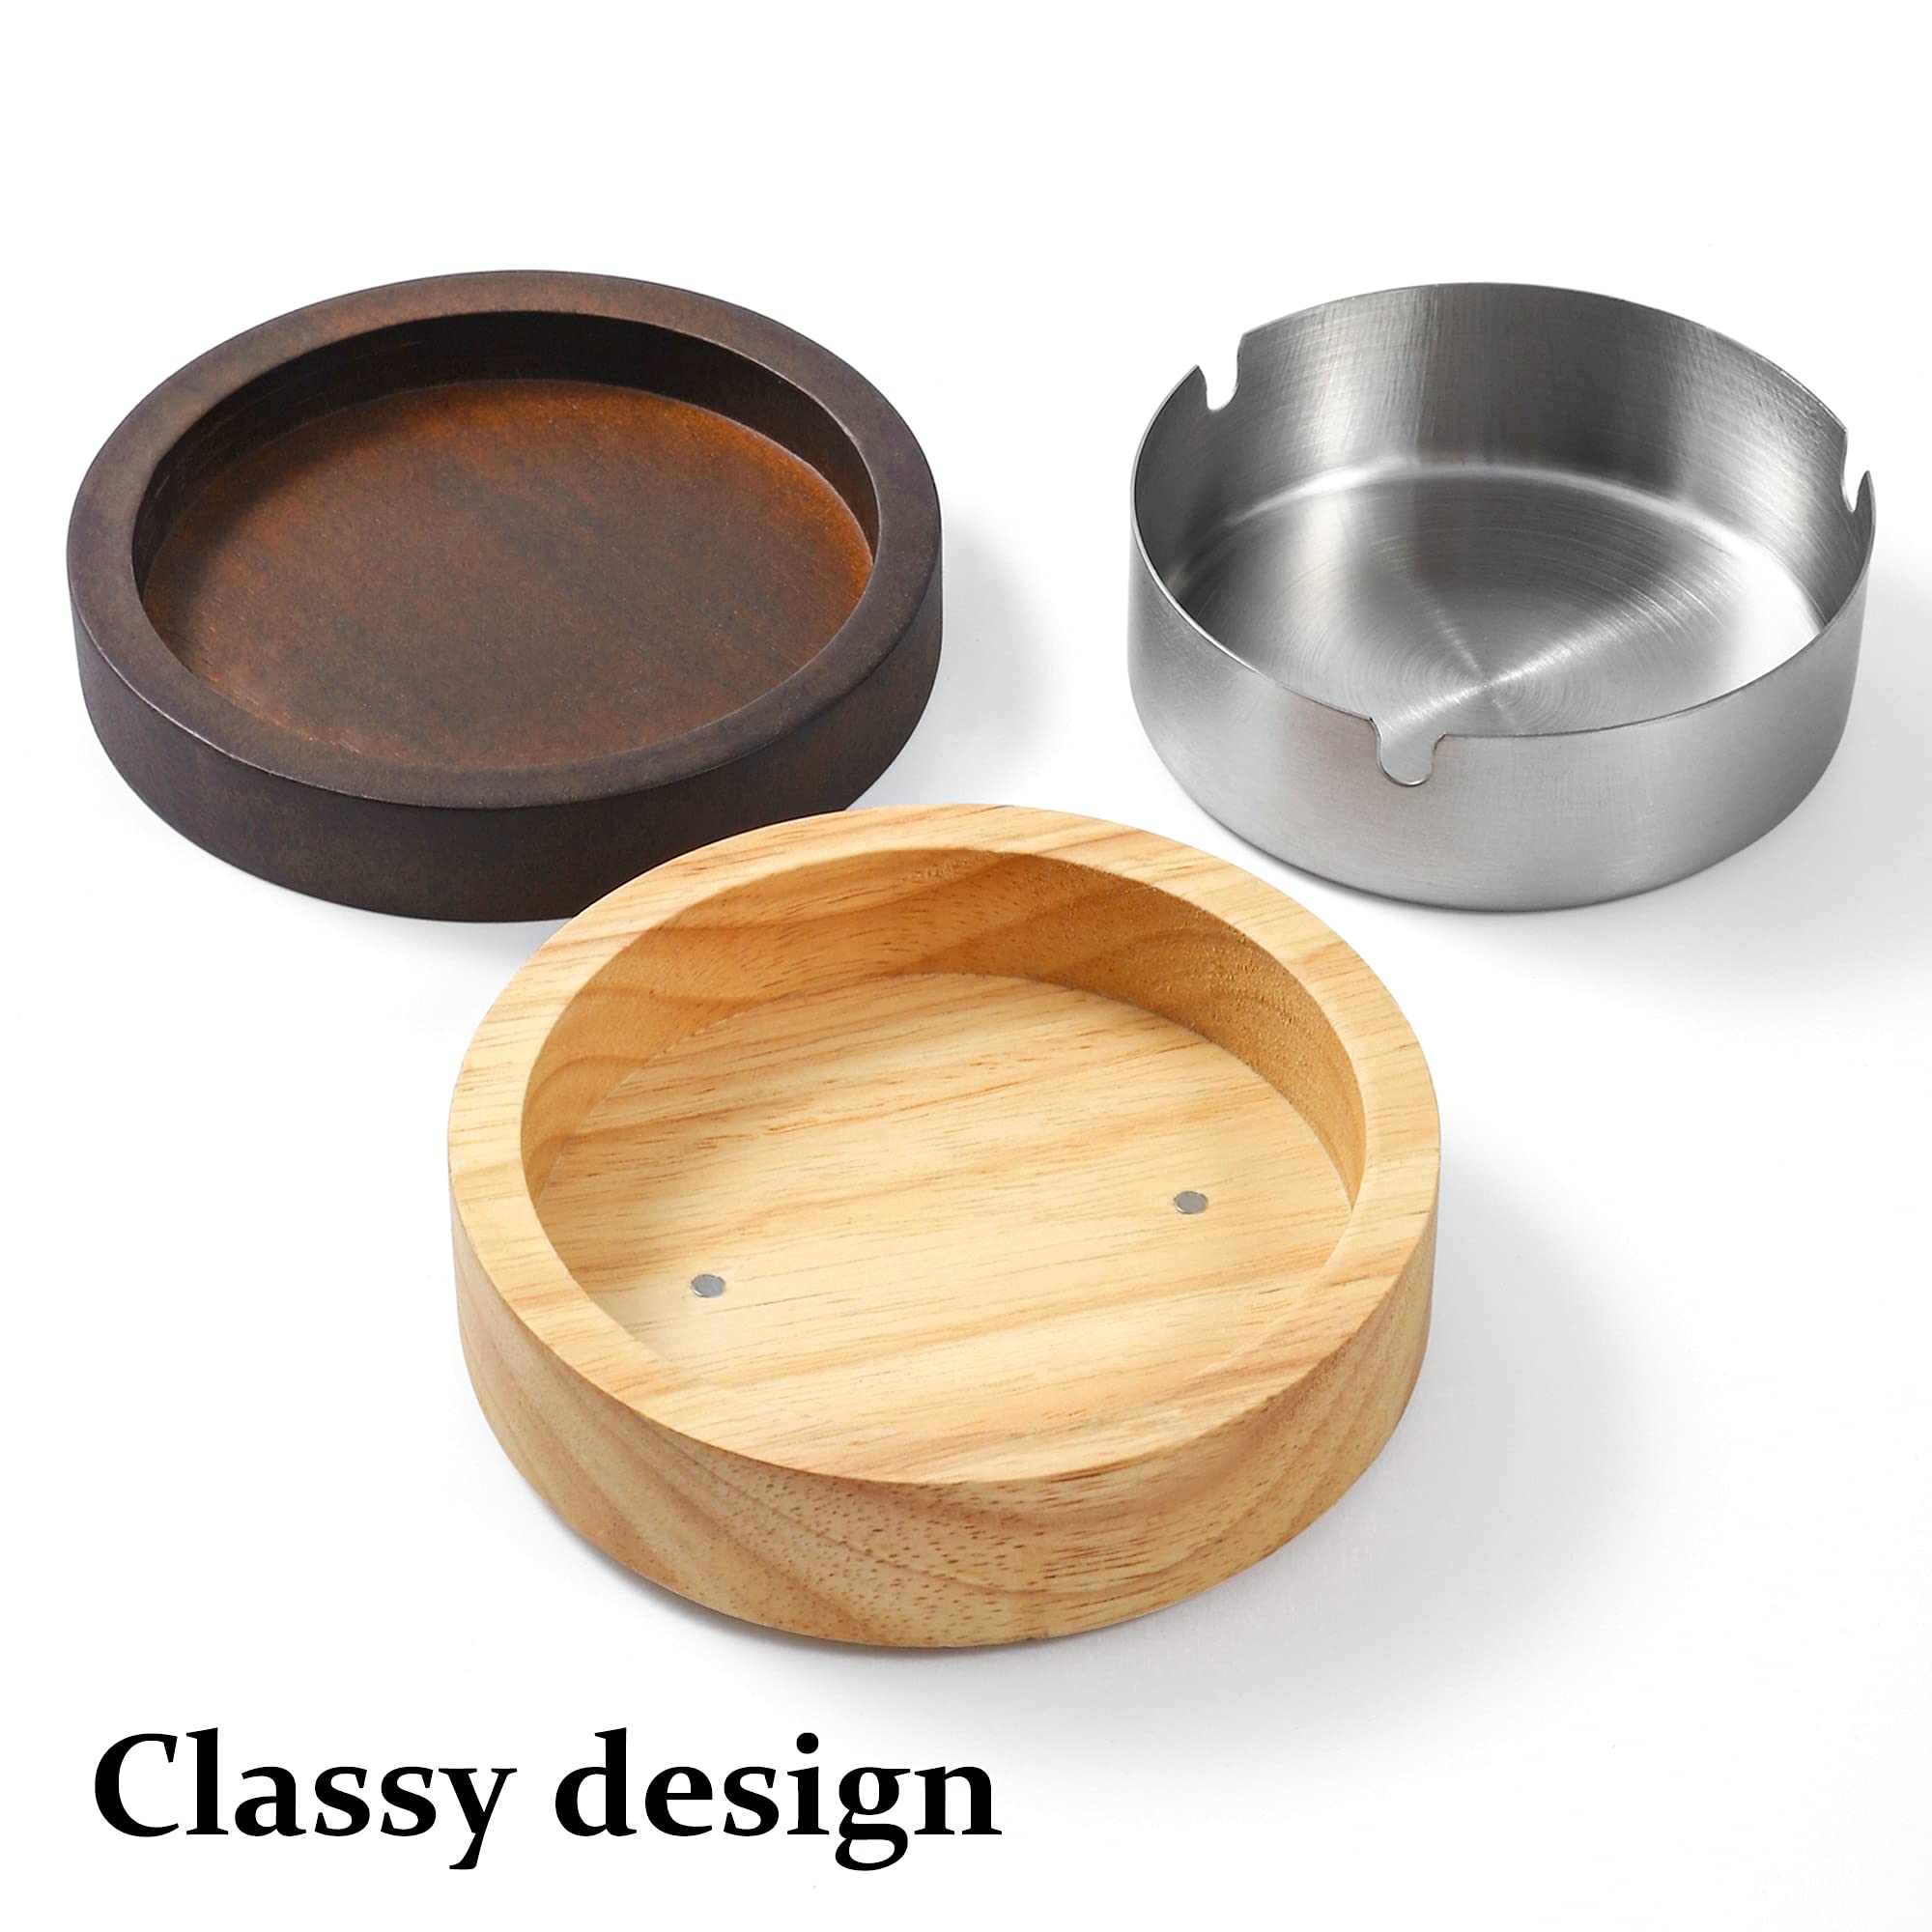 Cute Ashtrays for Cigarettes Ash Tray with Lid DDAJJAJ Wooden Ashtray with Stainless Steel Portable Decorative Ashtray Windproof Ashtray for Home,Patio,Office,Outdoors,Indoor,Parties